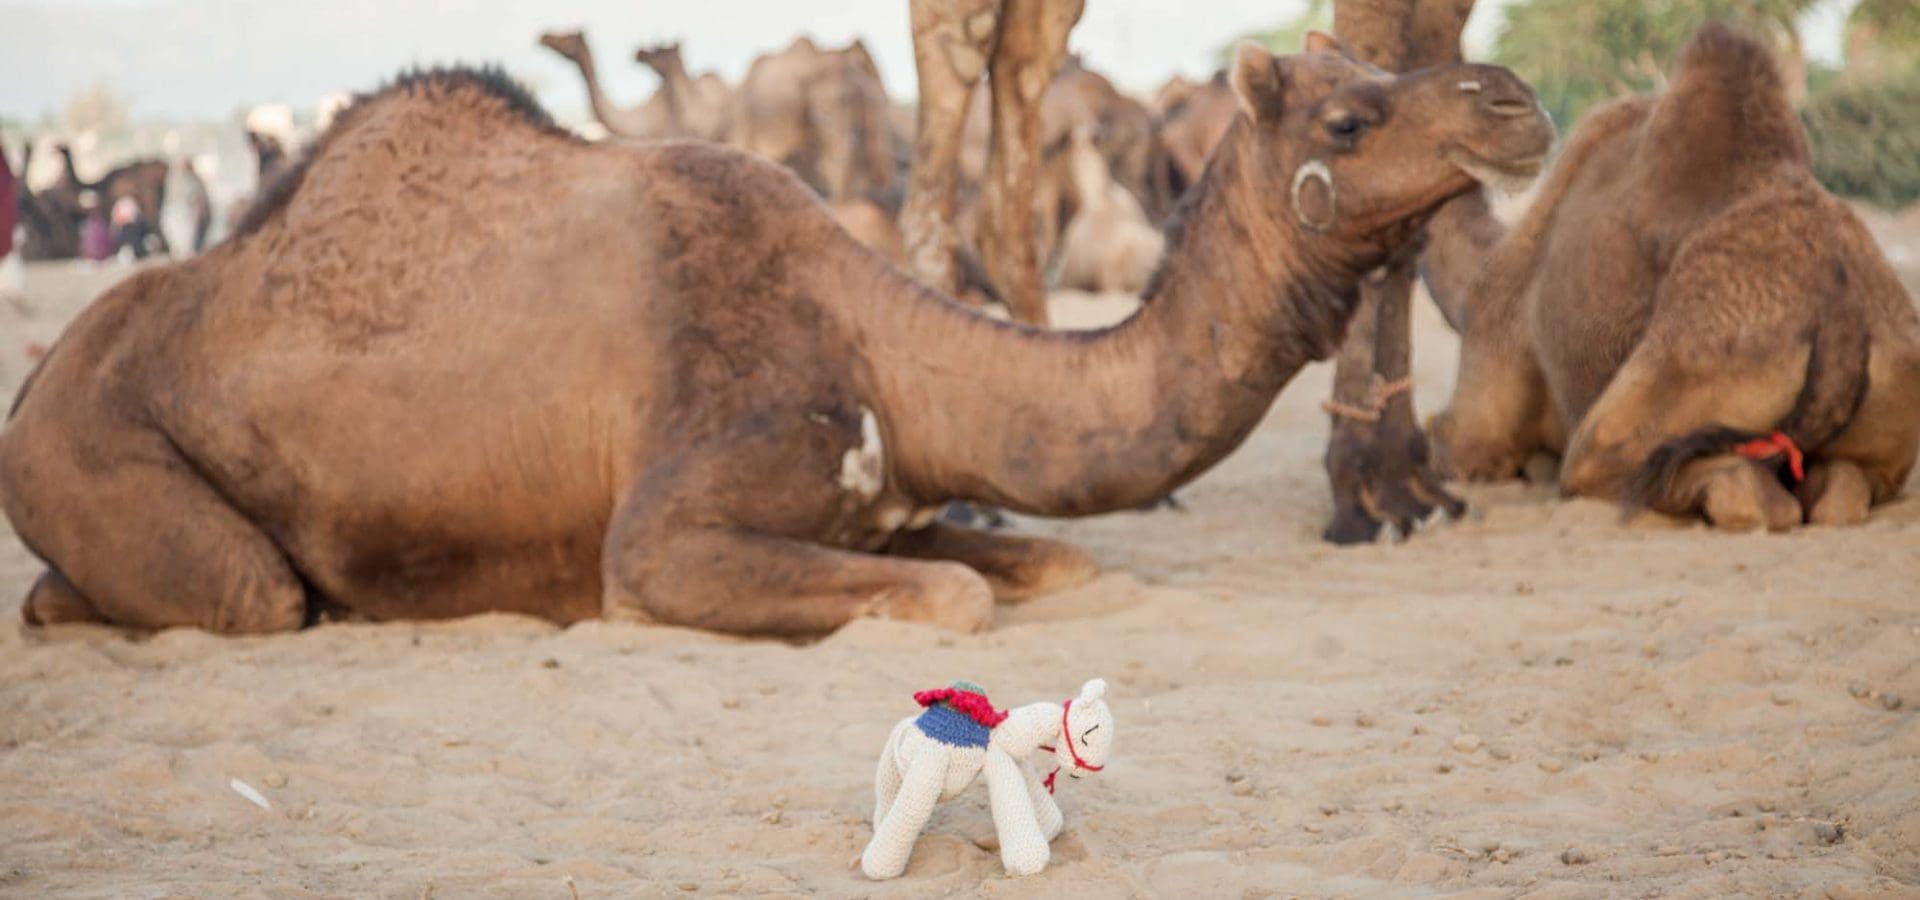 Knitted camel in desert next to real camels